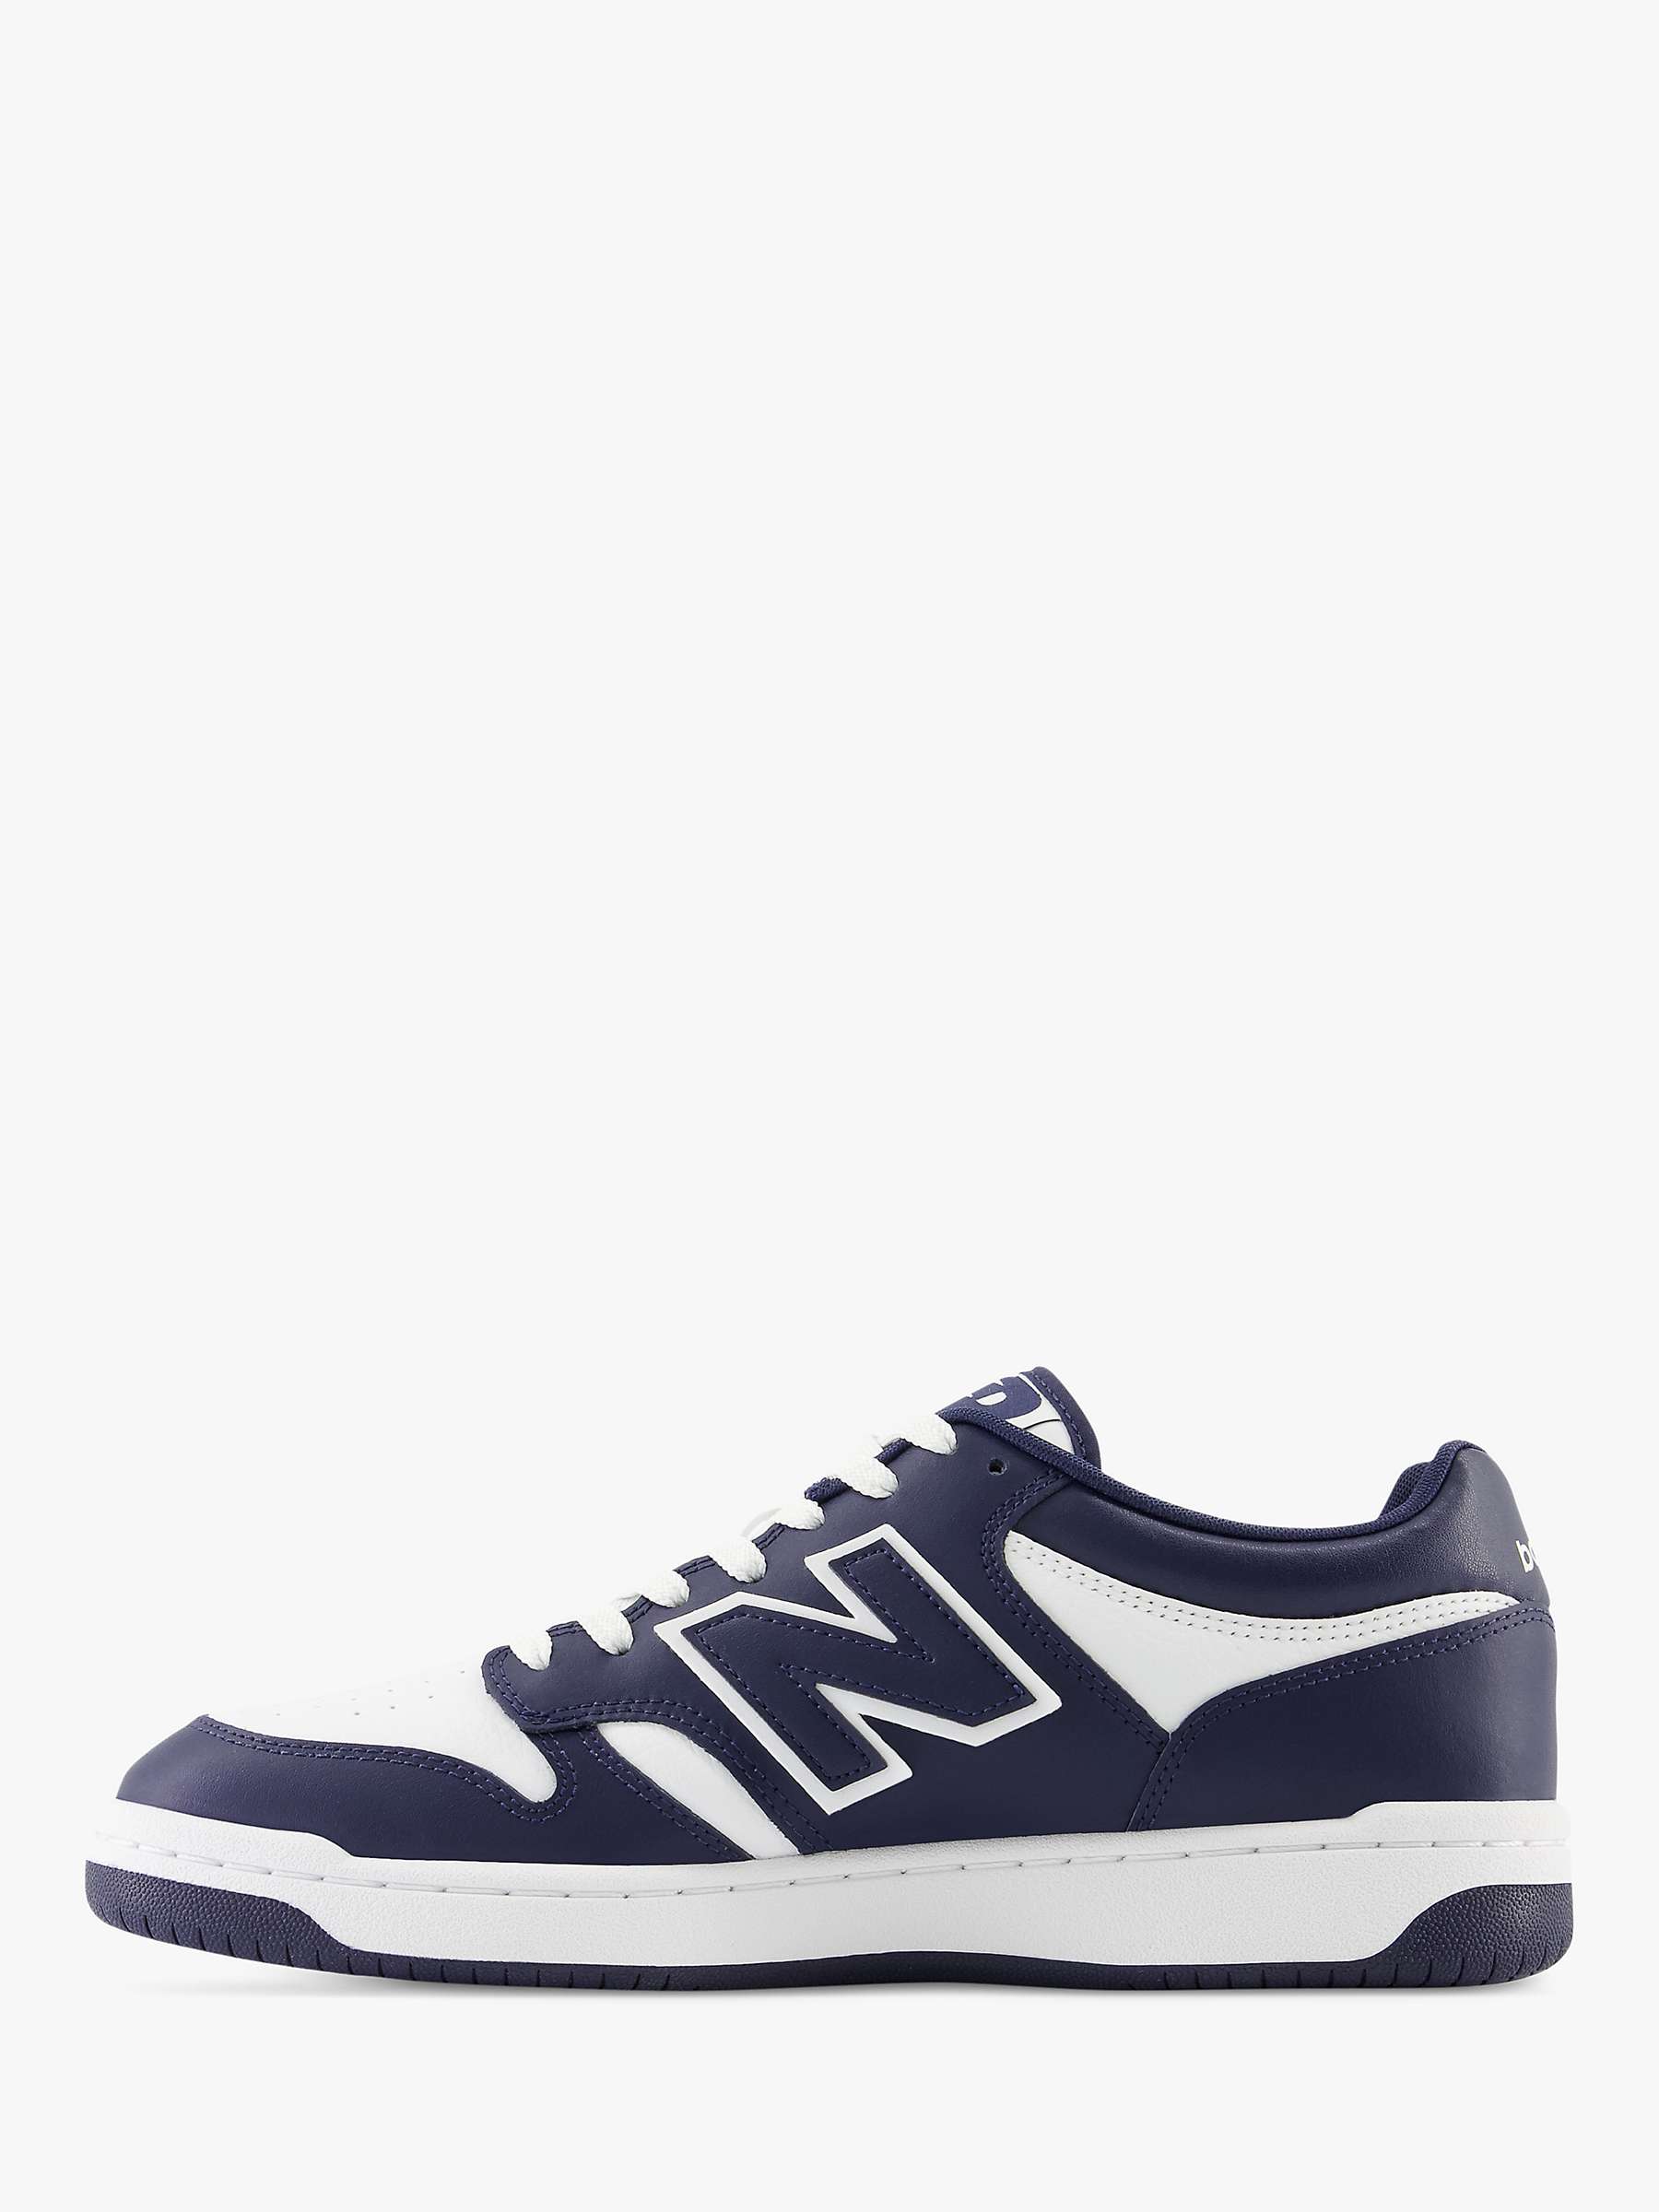 Buy New Balance 480 Lace Up Trainers, Marine Blue Online at johnlewis.com